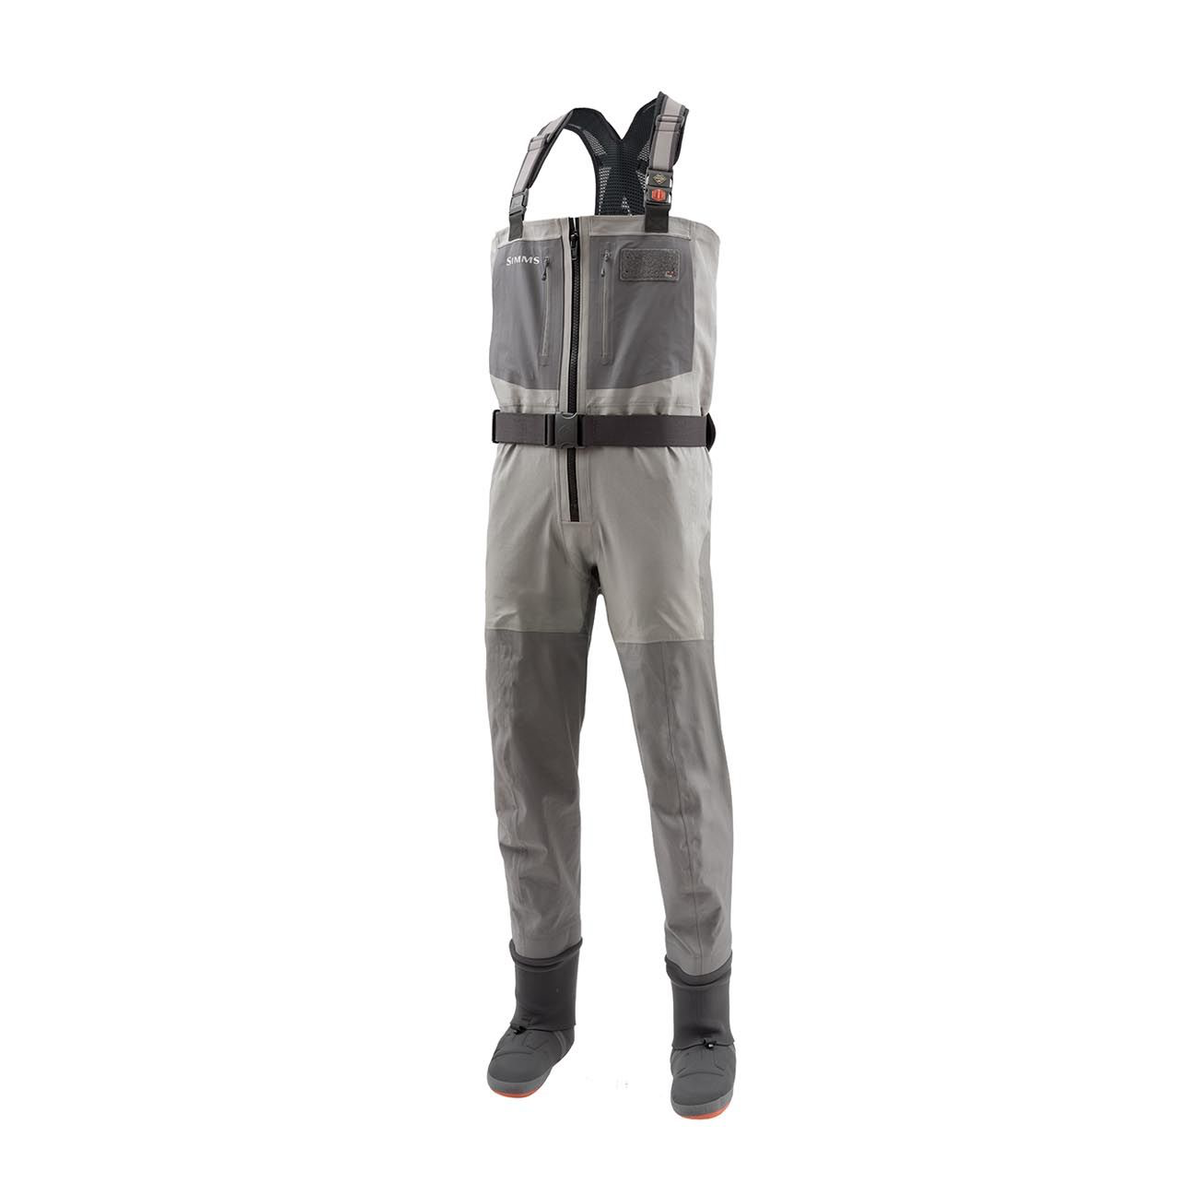 Simms G4Z Waders - Iron Bow Fly Shop